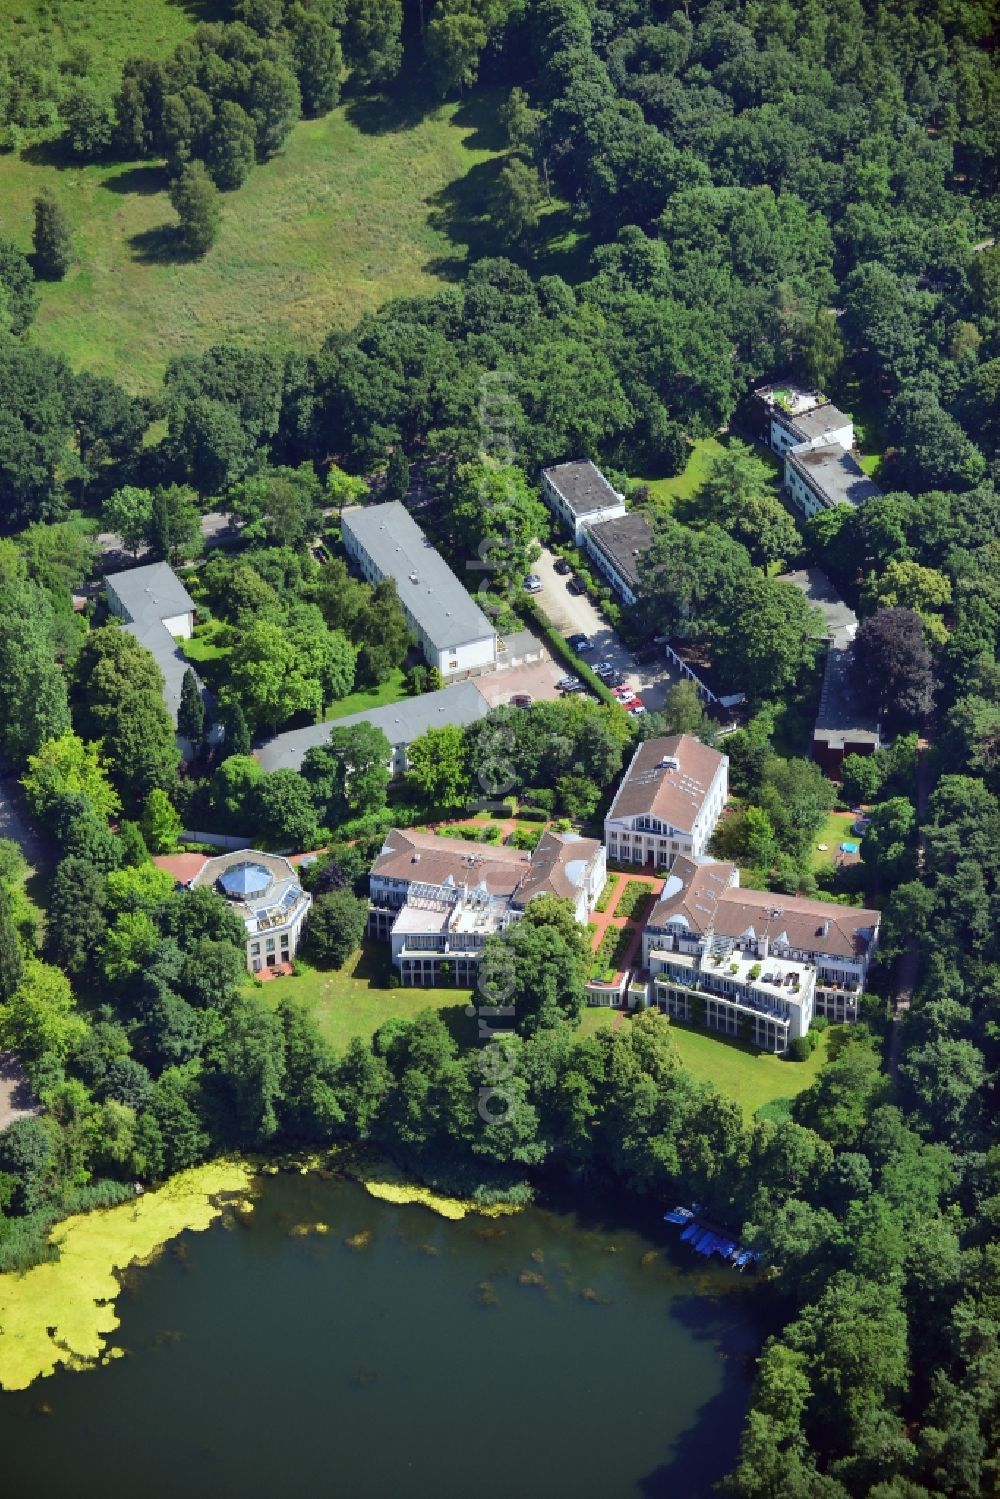 Aerial photograph Berlin - Residential compound on Königsallee at the lake Hundekehlesee in the district of Charlottenburg - Wilmersdorf in Berlin in the state of Brandenburg. The residential area is located on the lake's South shore at the edge of a neighbourhood of stately mansions in the Grunewald part of the district